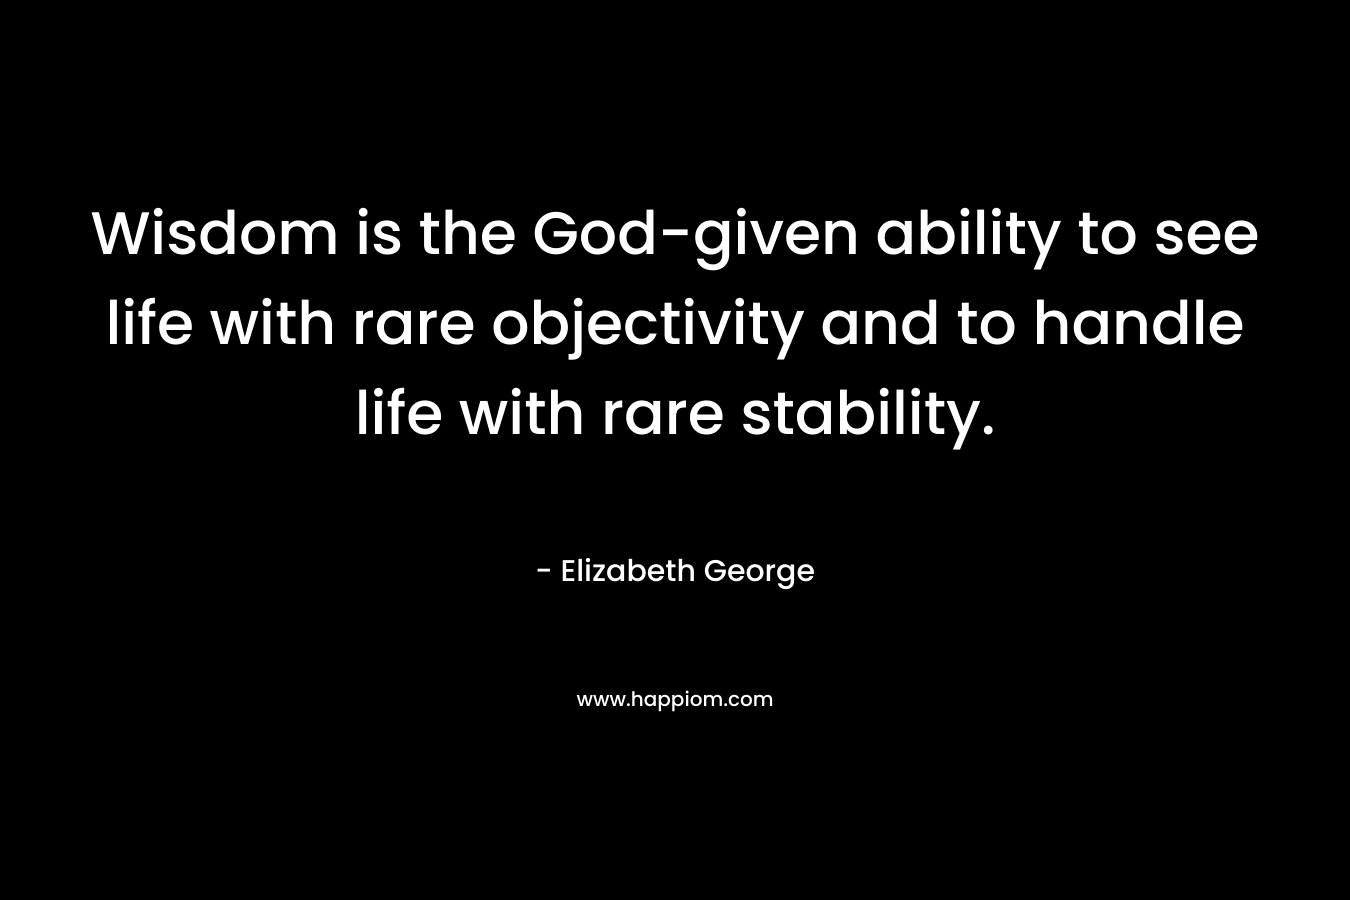 Wisdom is the God-given ability to see life with rare objectivity and to handle life with rare stability. – Elizabeth George